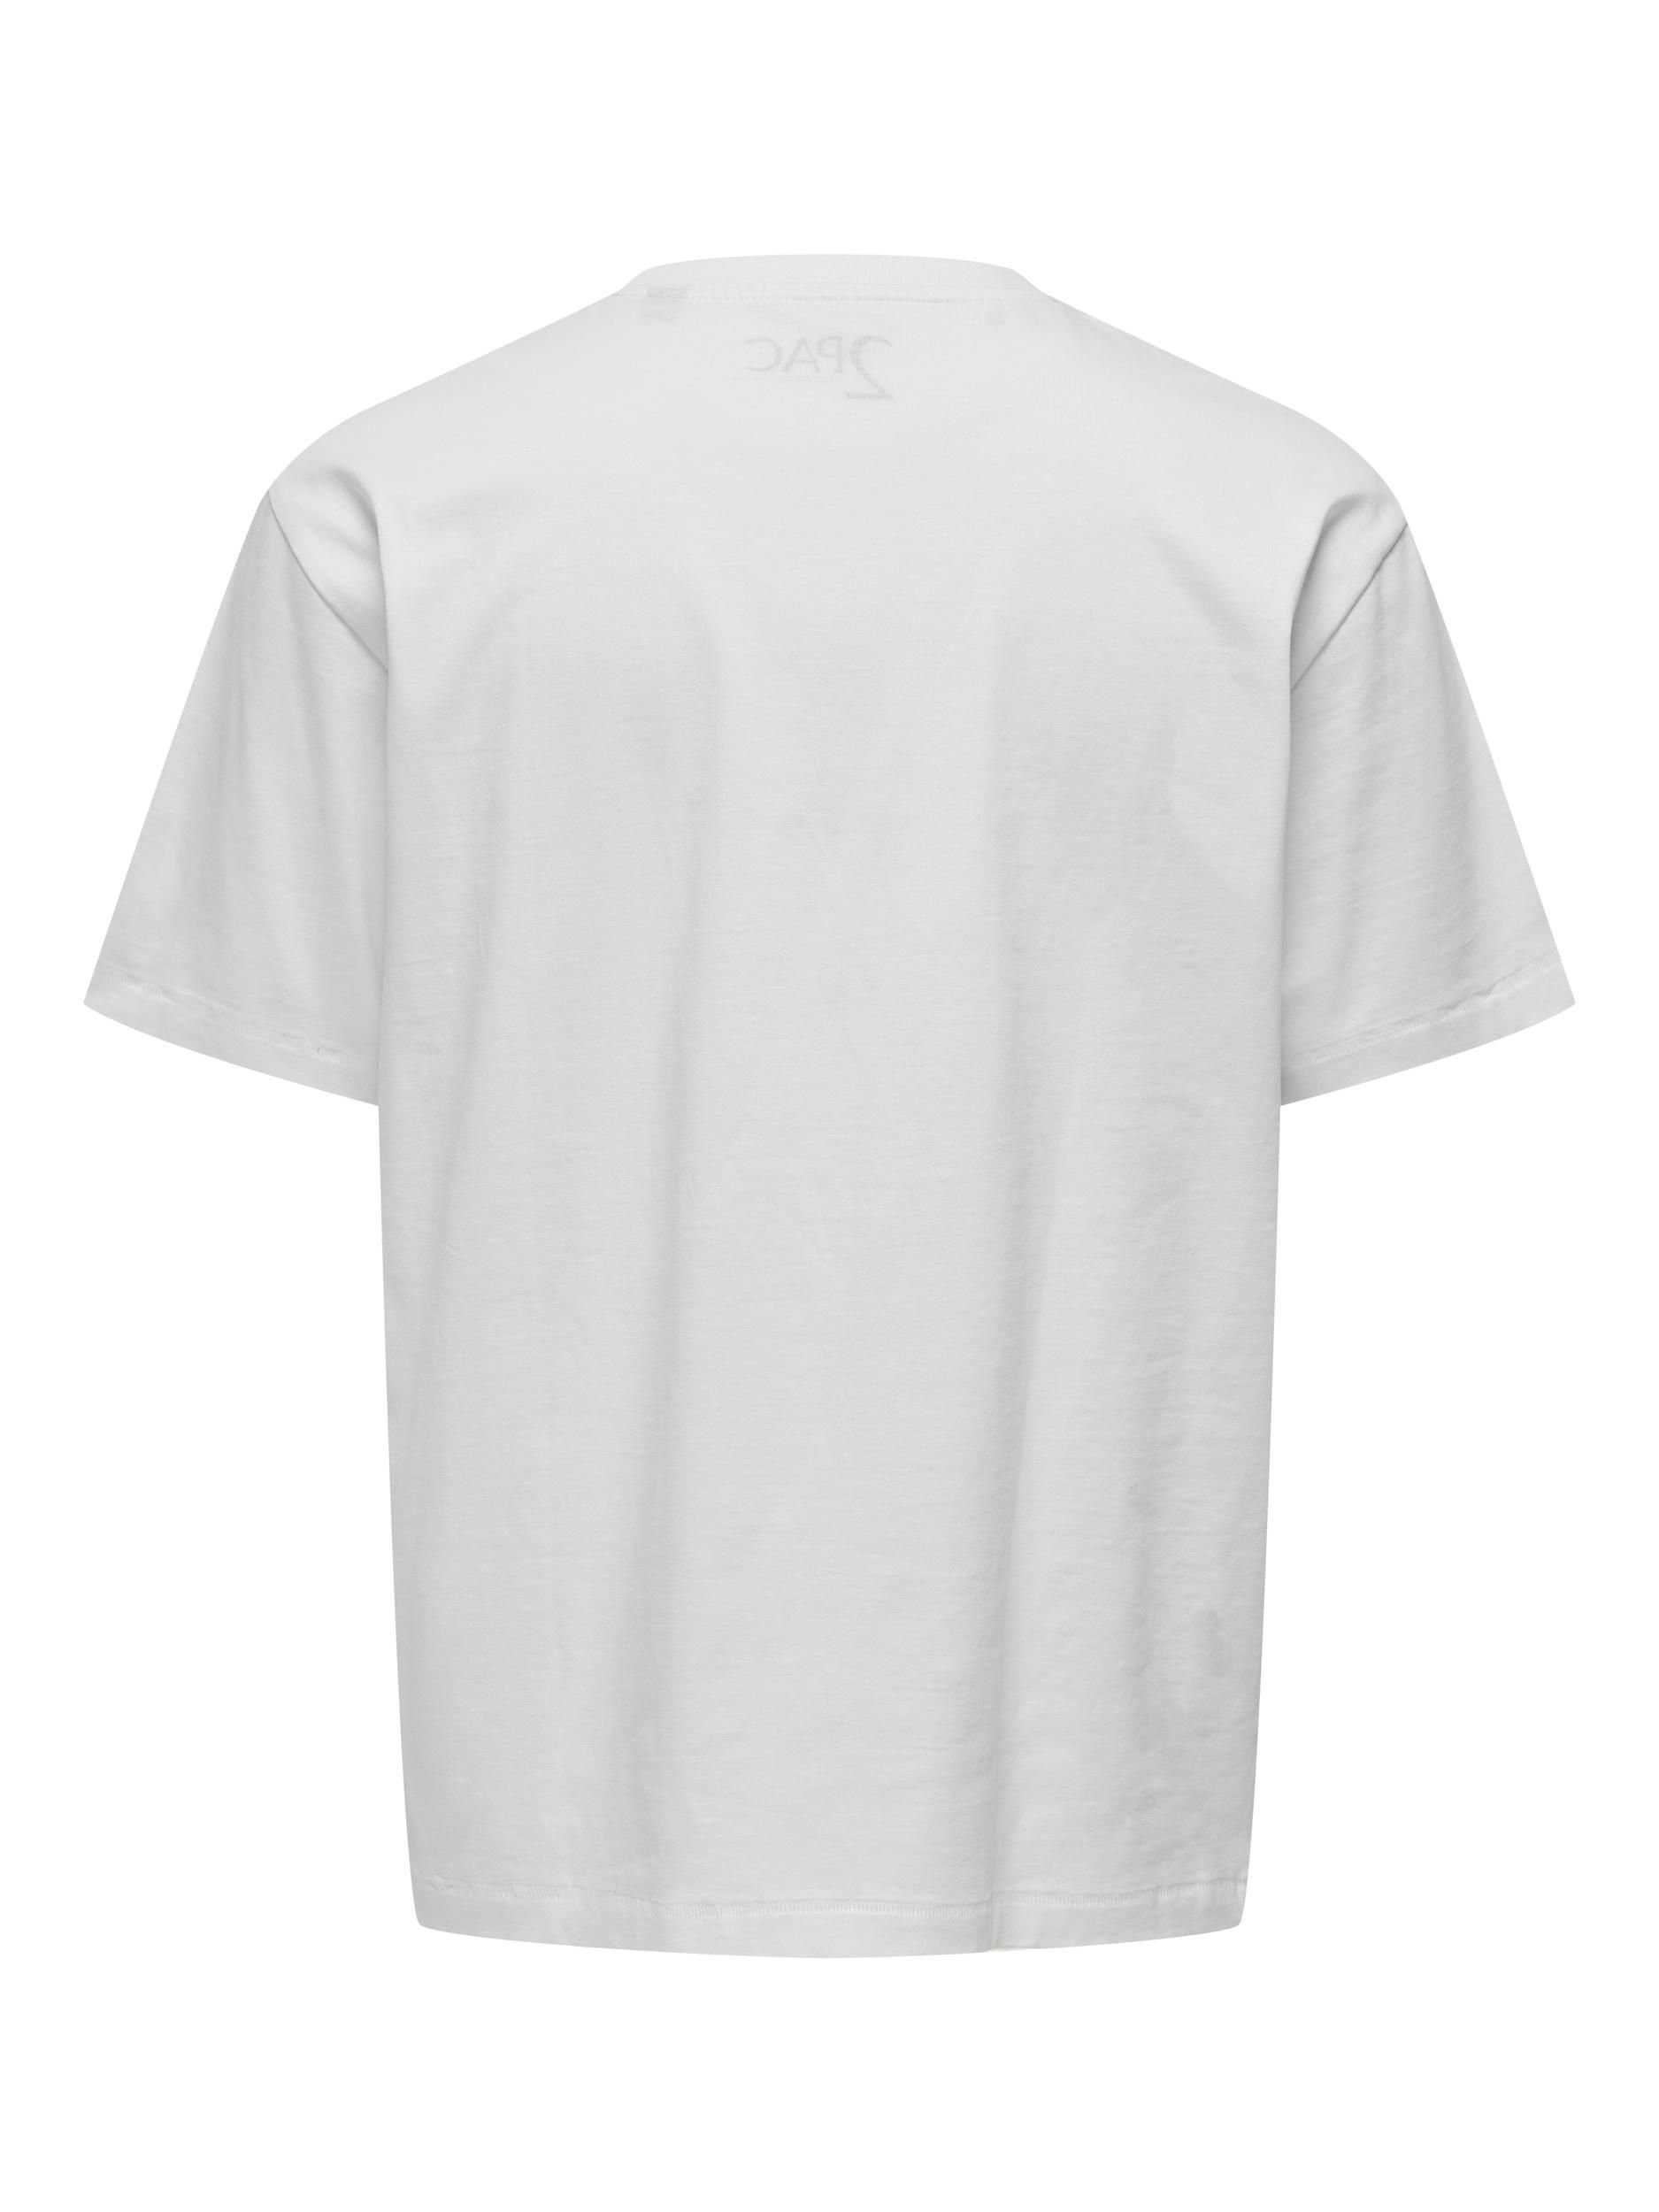 ONLY & SONS T-Shirt 209112 Bright White